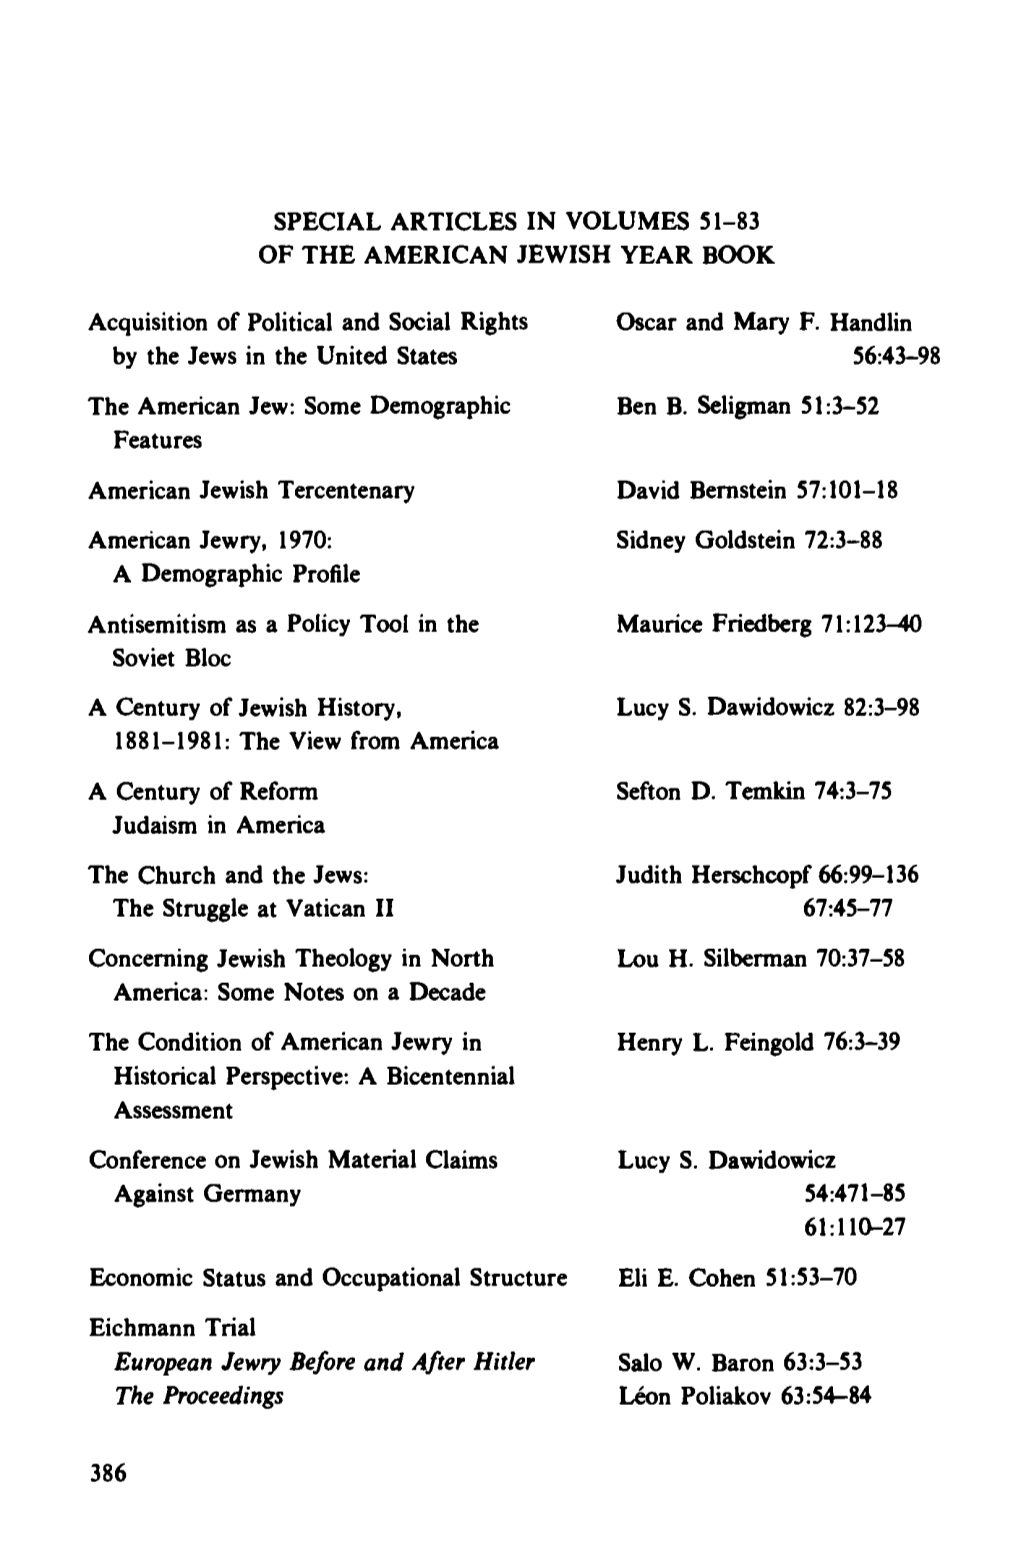 Special Articles in Volumes 51-83 of the American Jewish Year Book